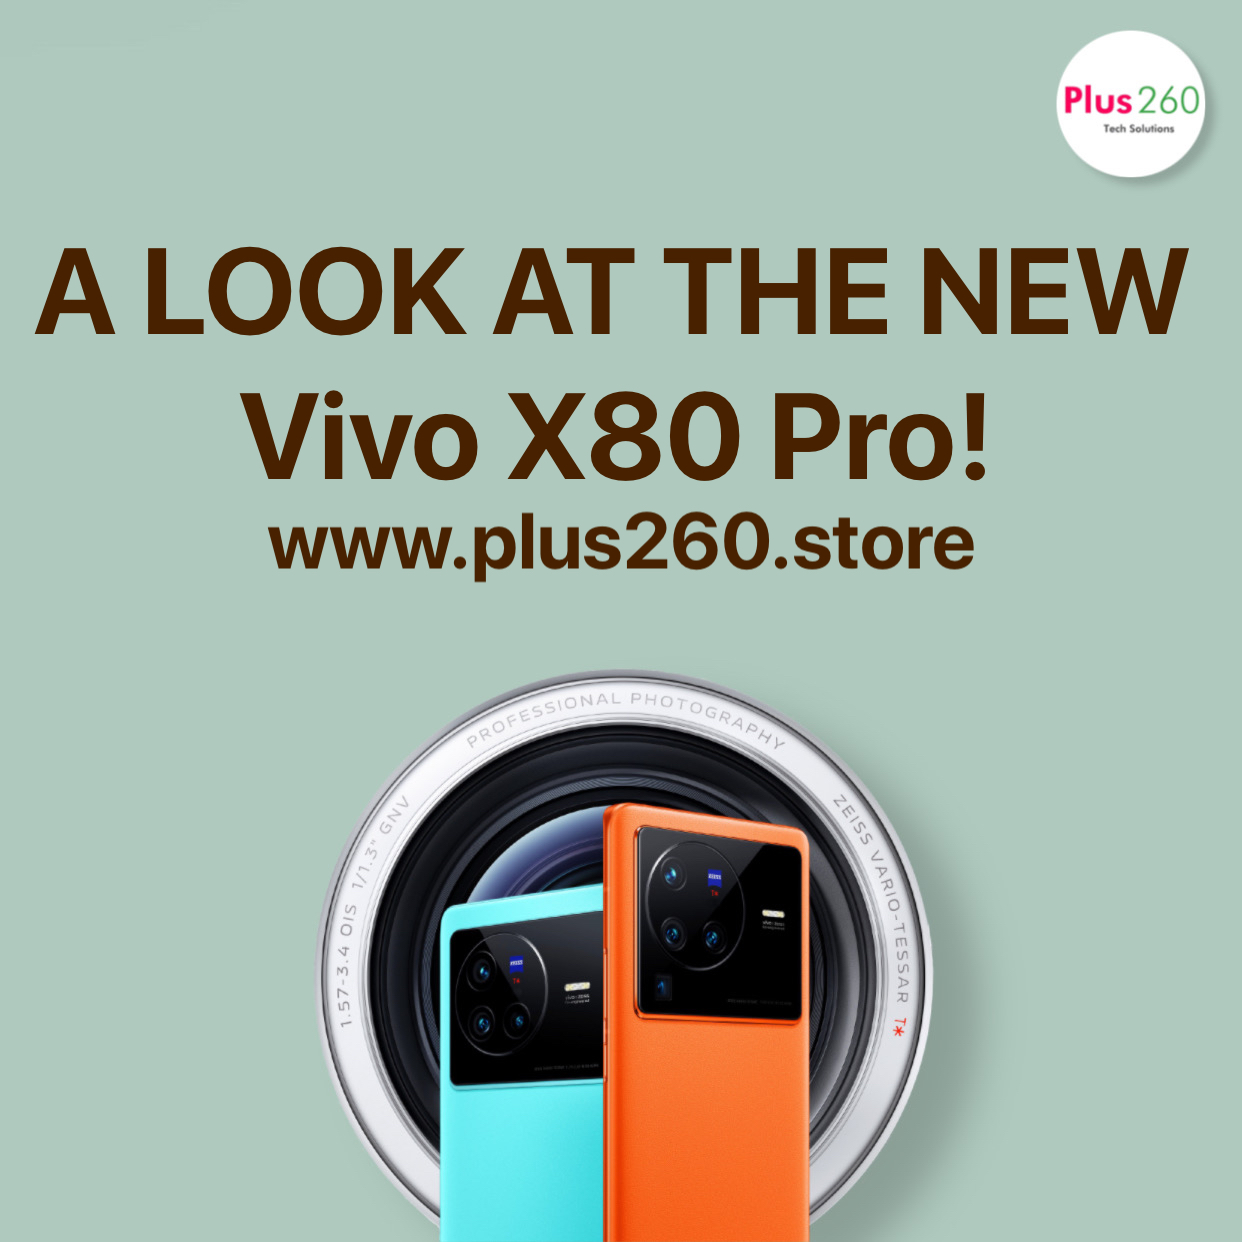 A LOOK AT THE NEW Vivo X80 Pro! - Plus260 Tech Solutions